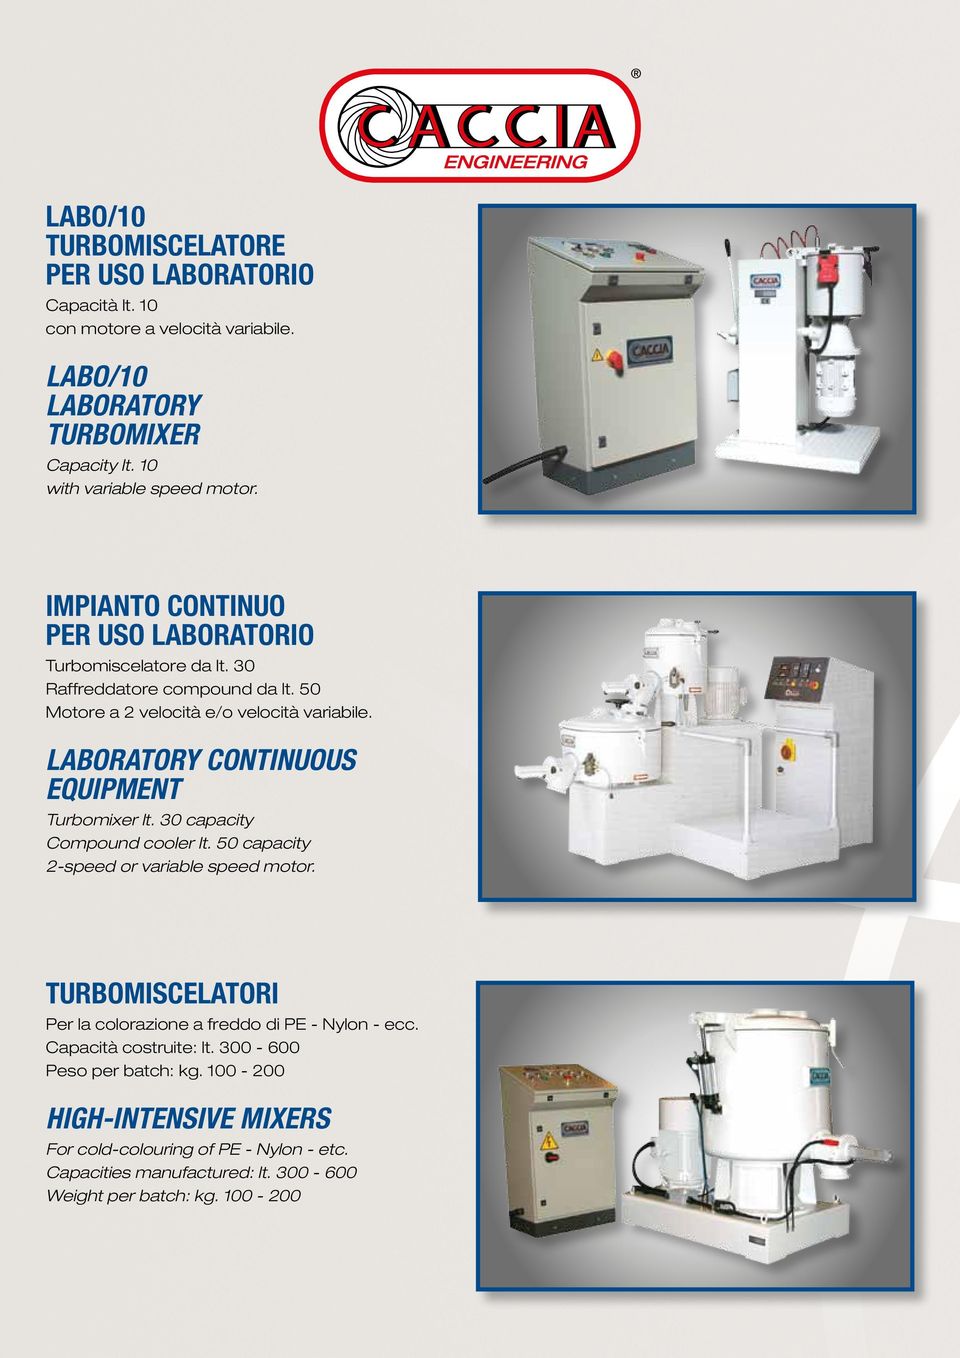 LABORATORY CONTINUOUS EQUIPMENT Turbomixer lt. 30 capacity Compound cooler lt. 50 capacity 2speed or variable speed motor.